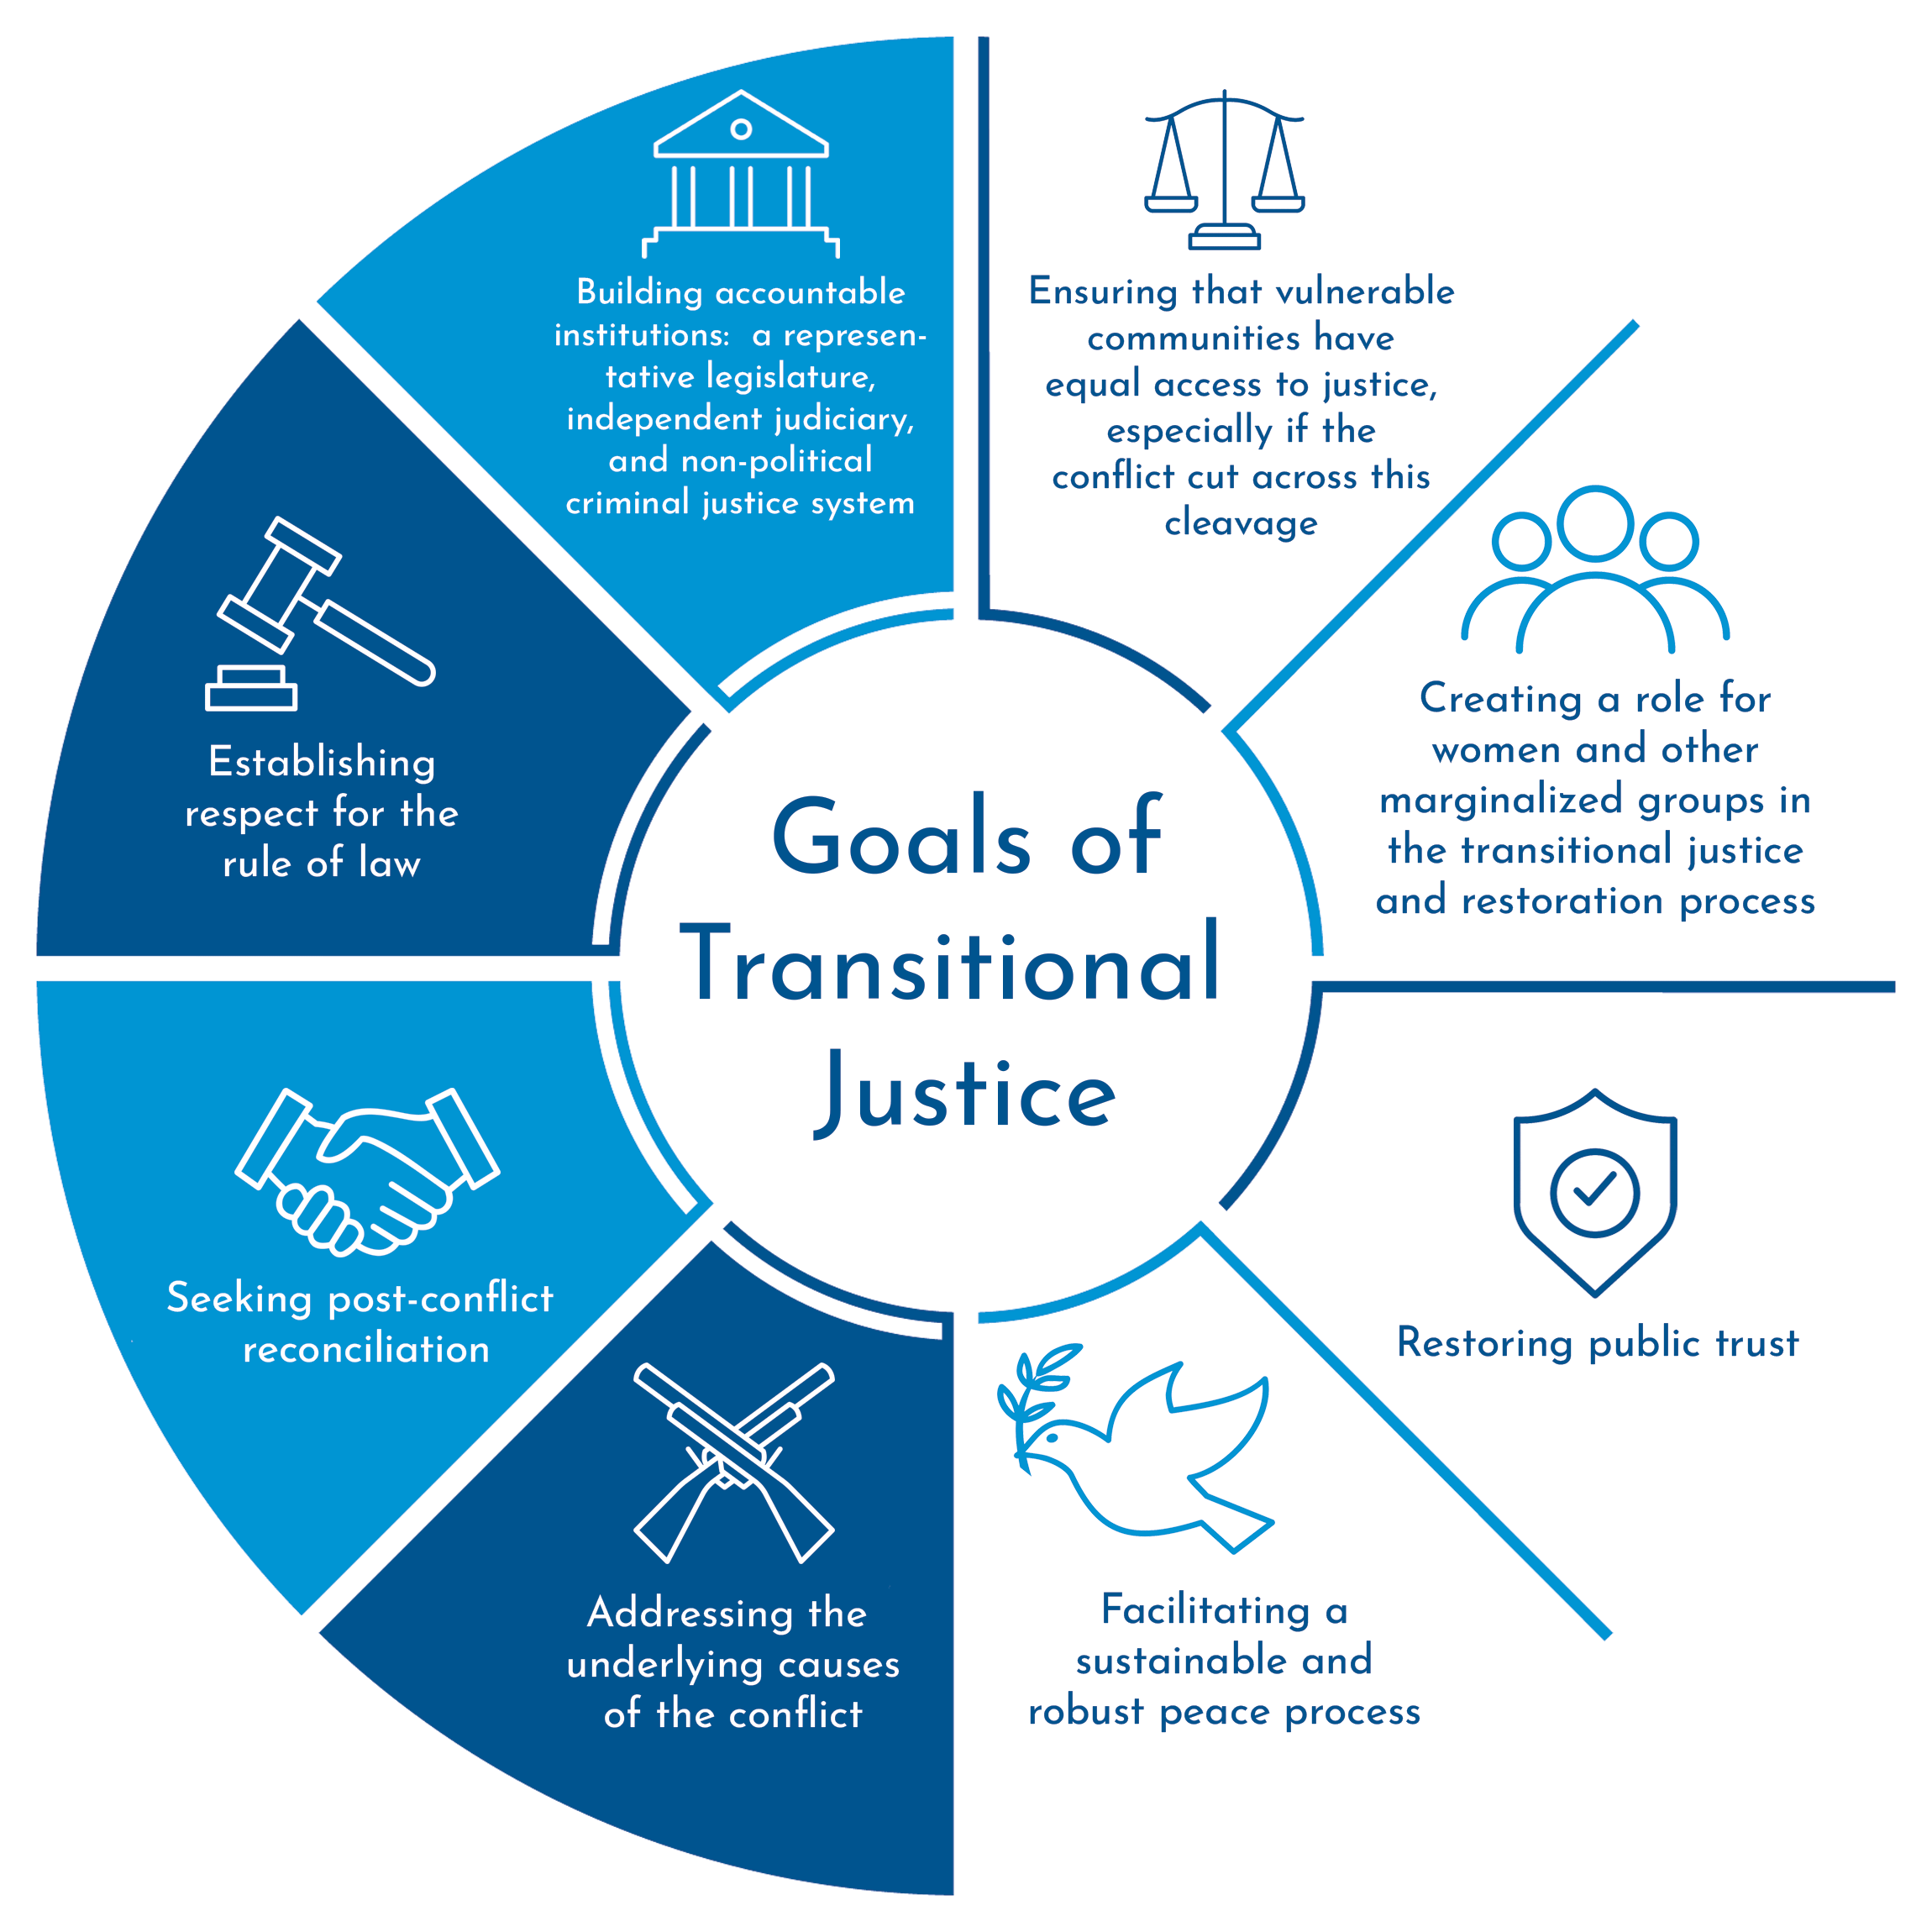 Goals of Transitional Justice